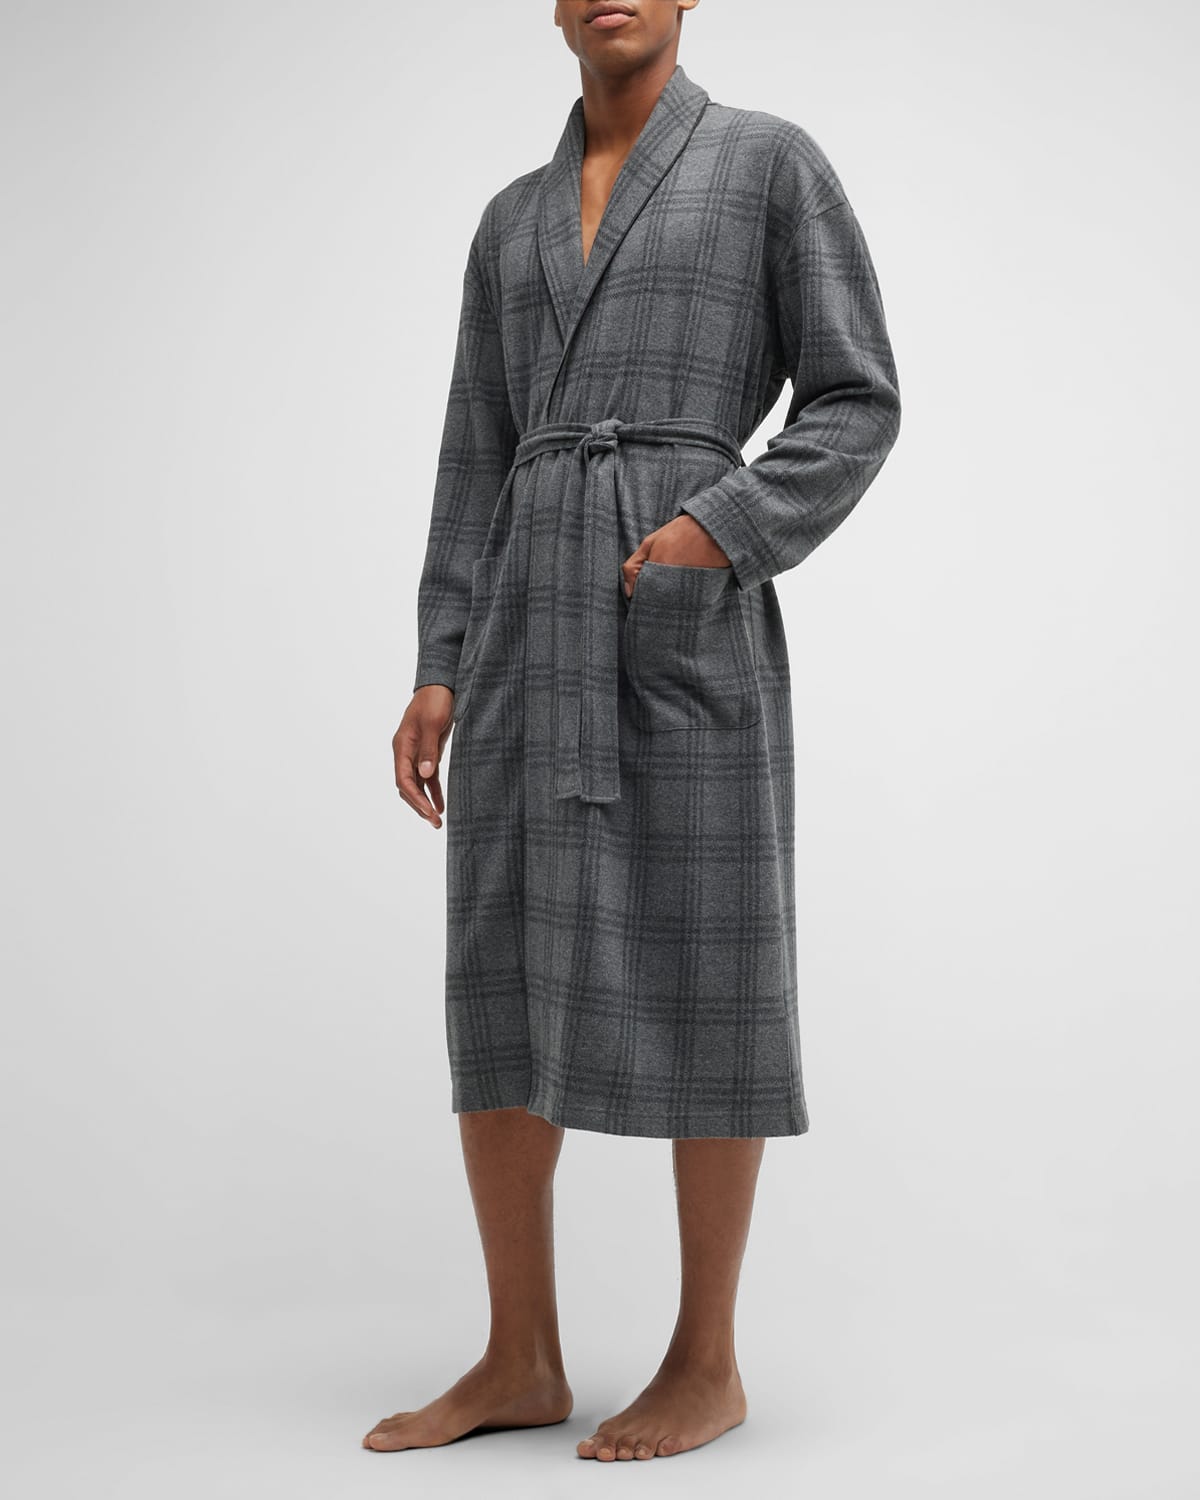 Majestic International Men's Frosted Nights Robe